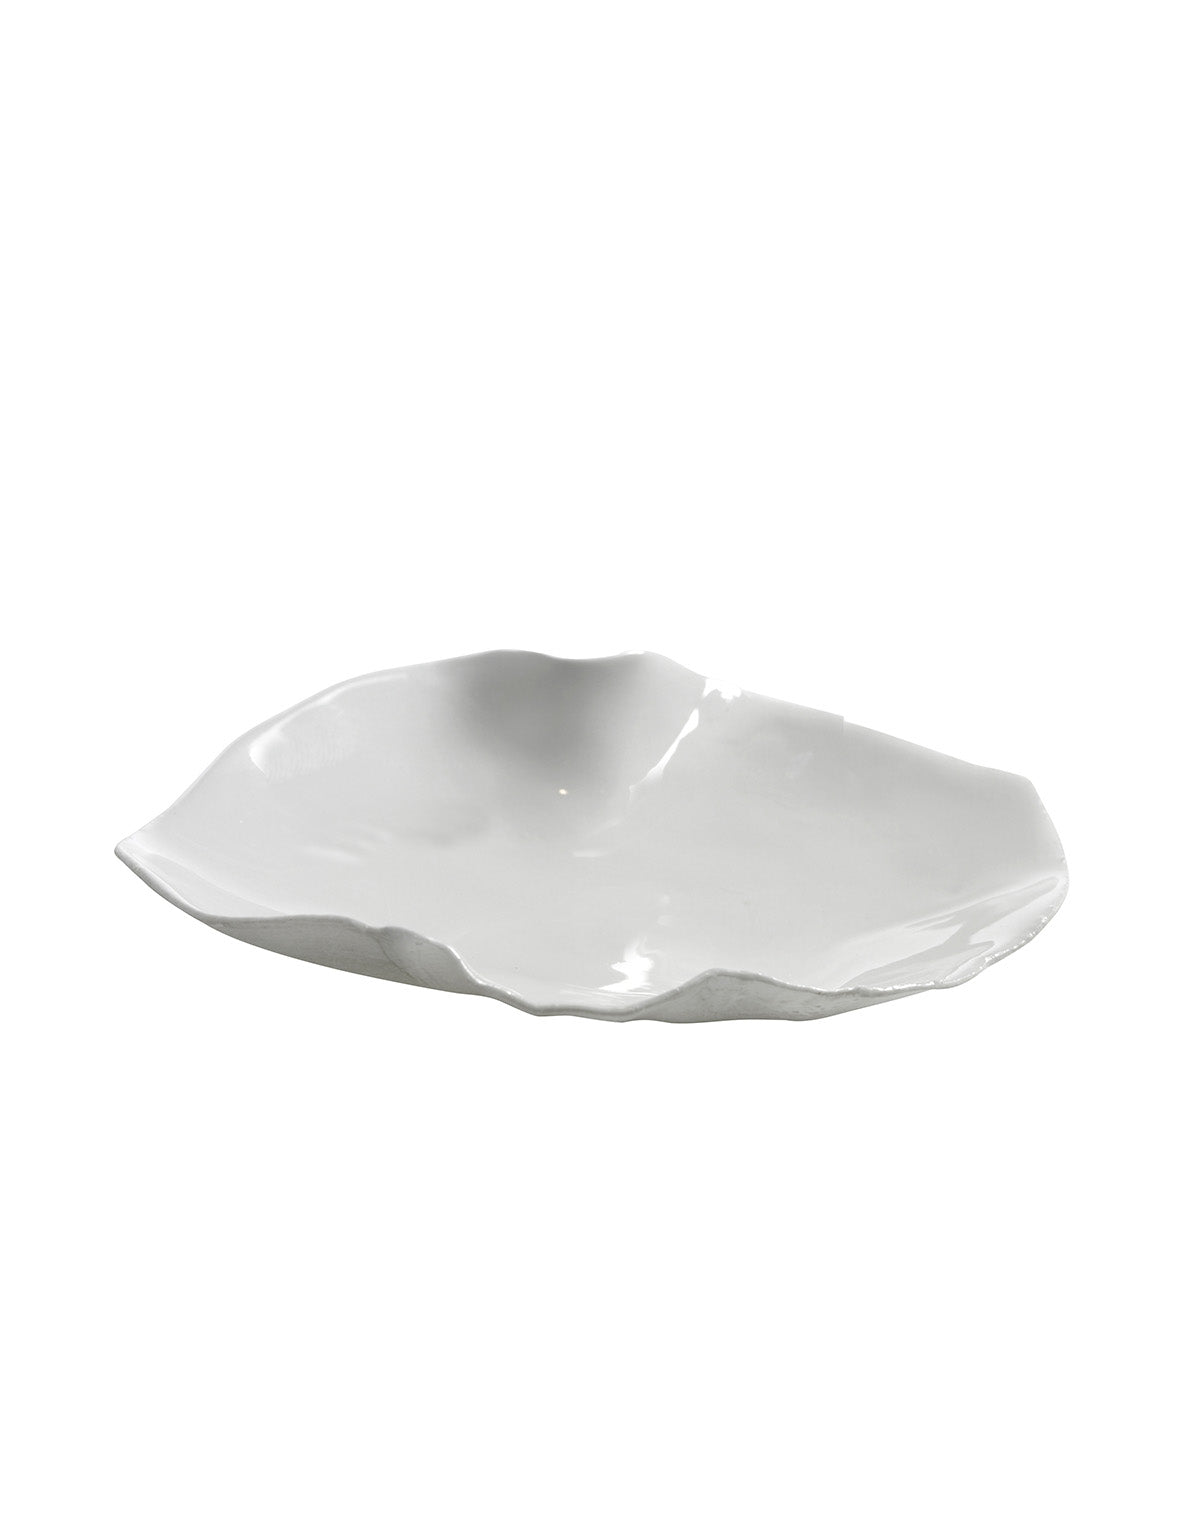 Wavy Plate, Small